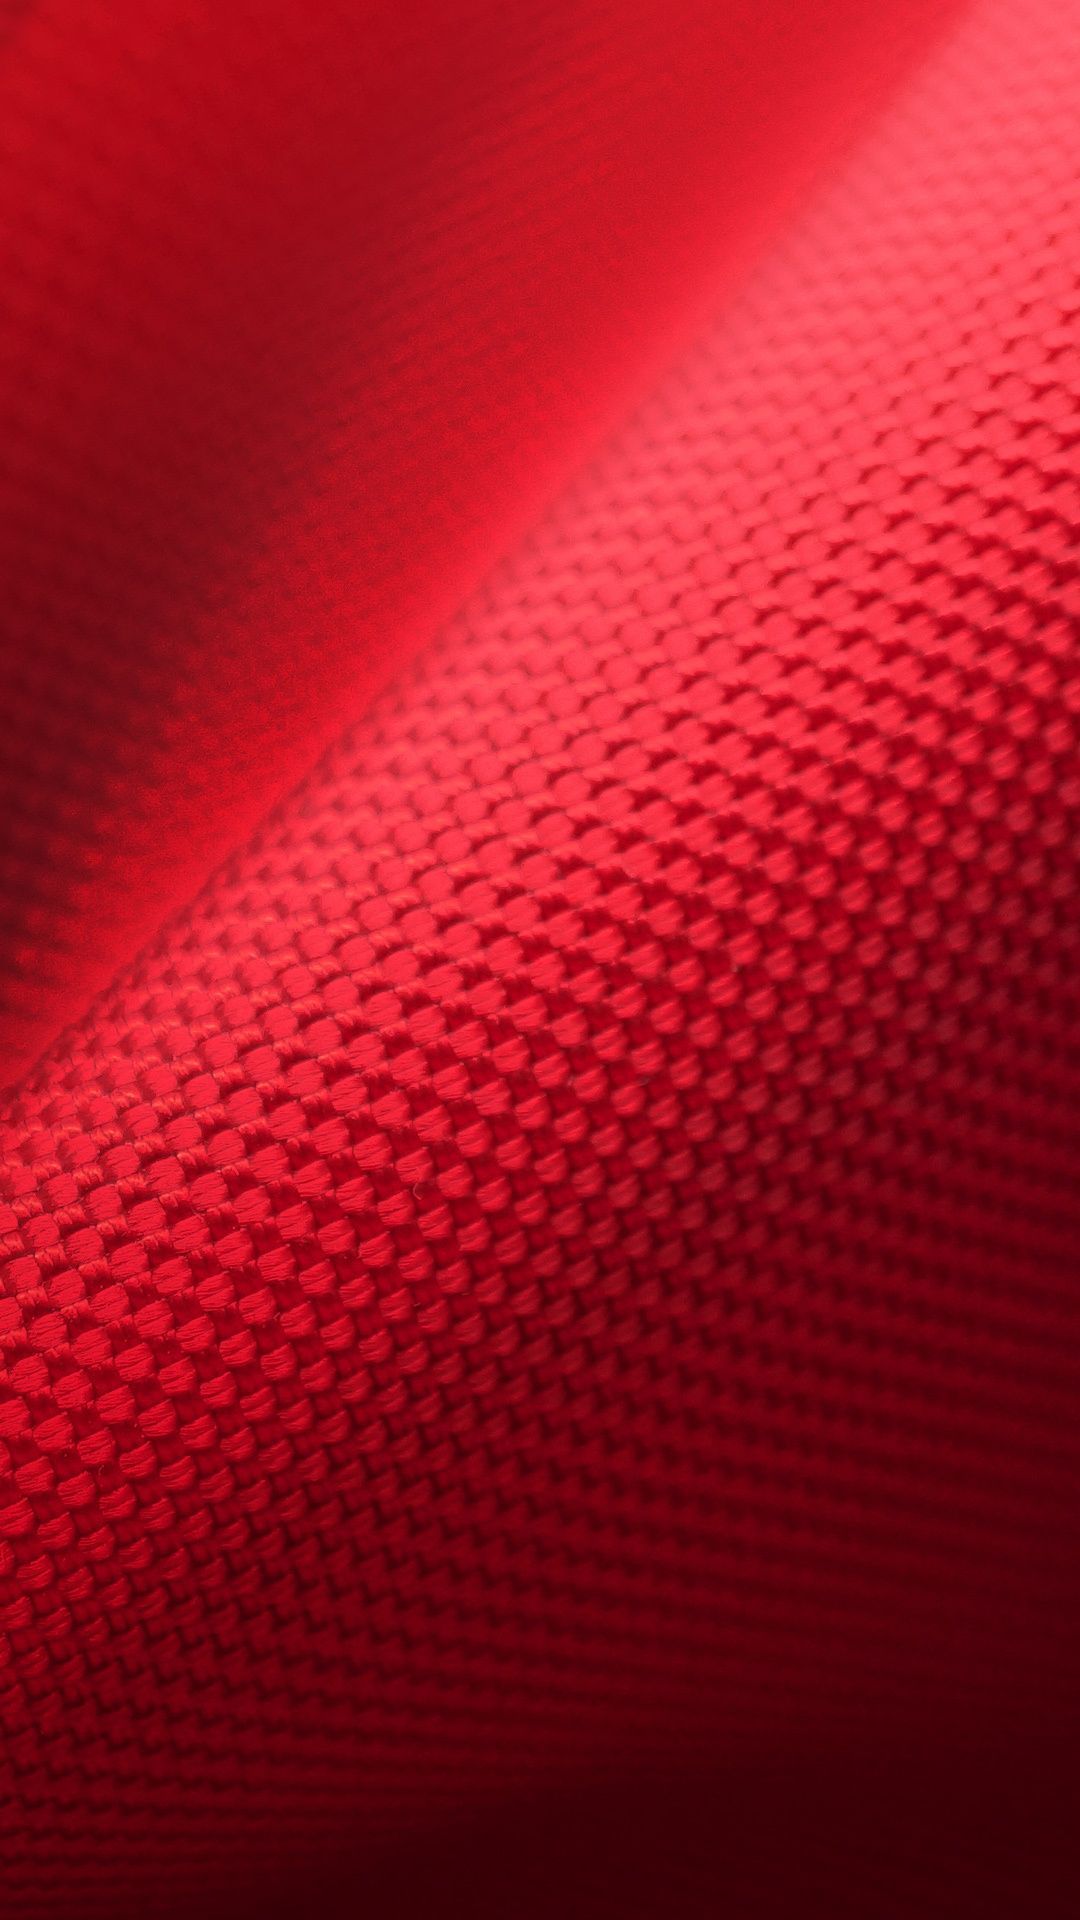 Red Hd iPhone 5 wallpaper